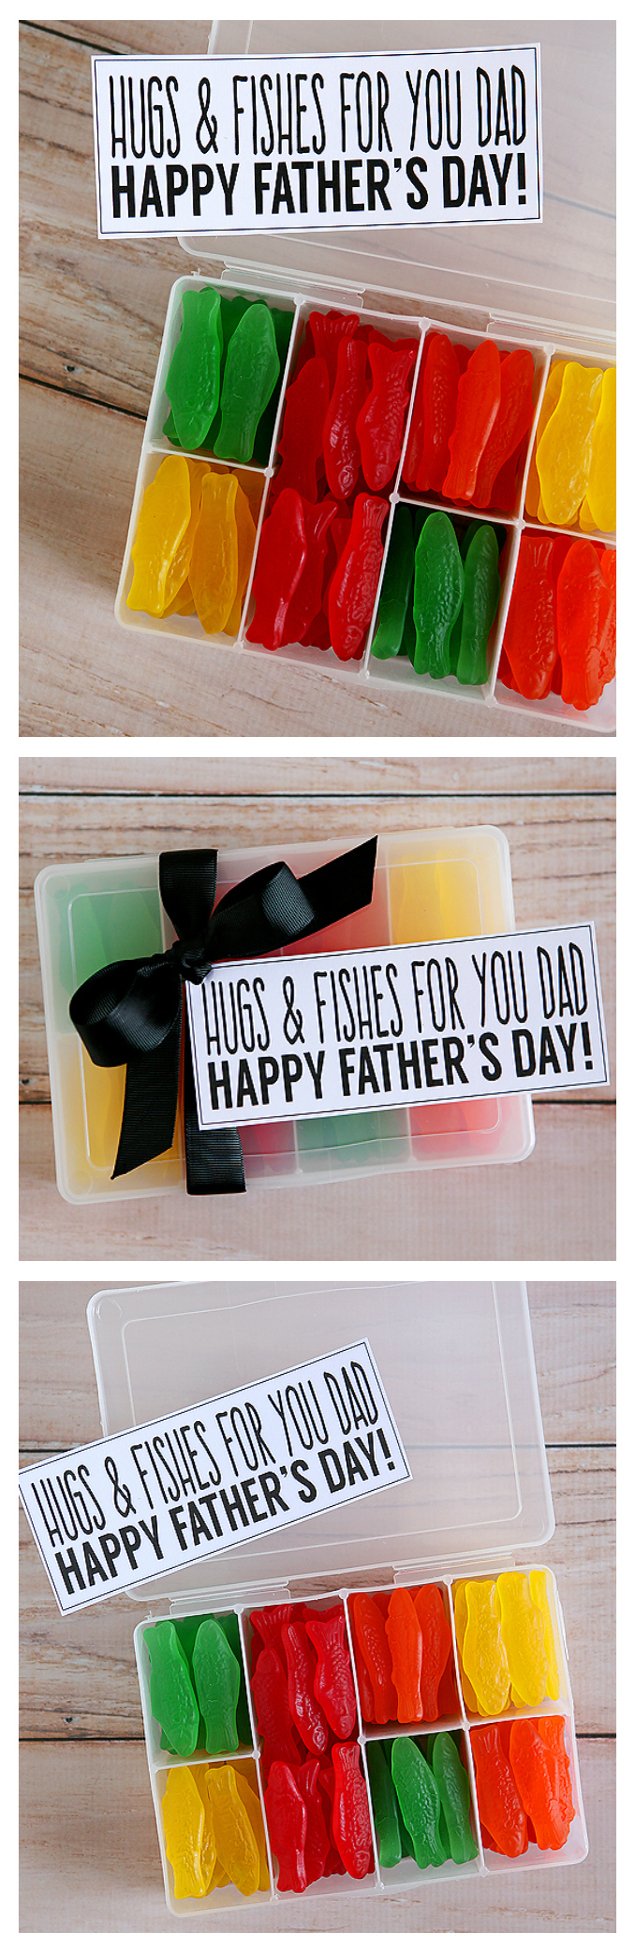 25 Creative Father's Day Gifts - Crazy Little Projects